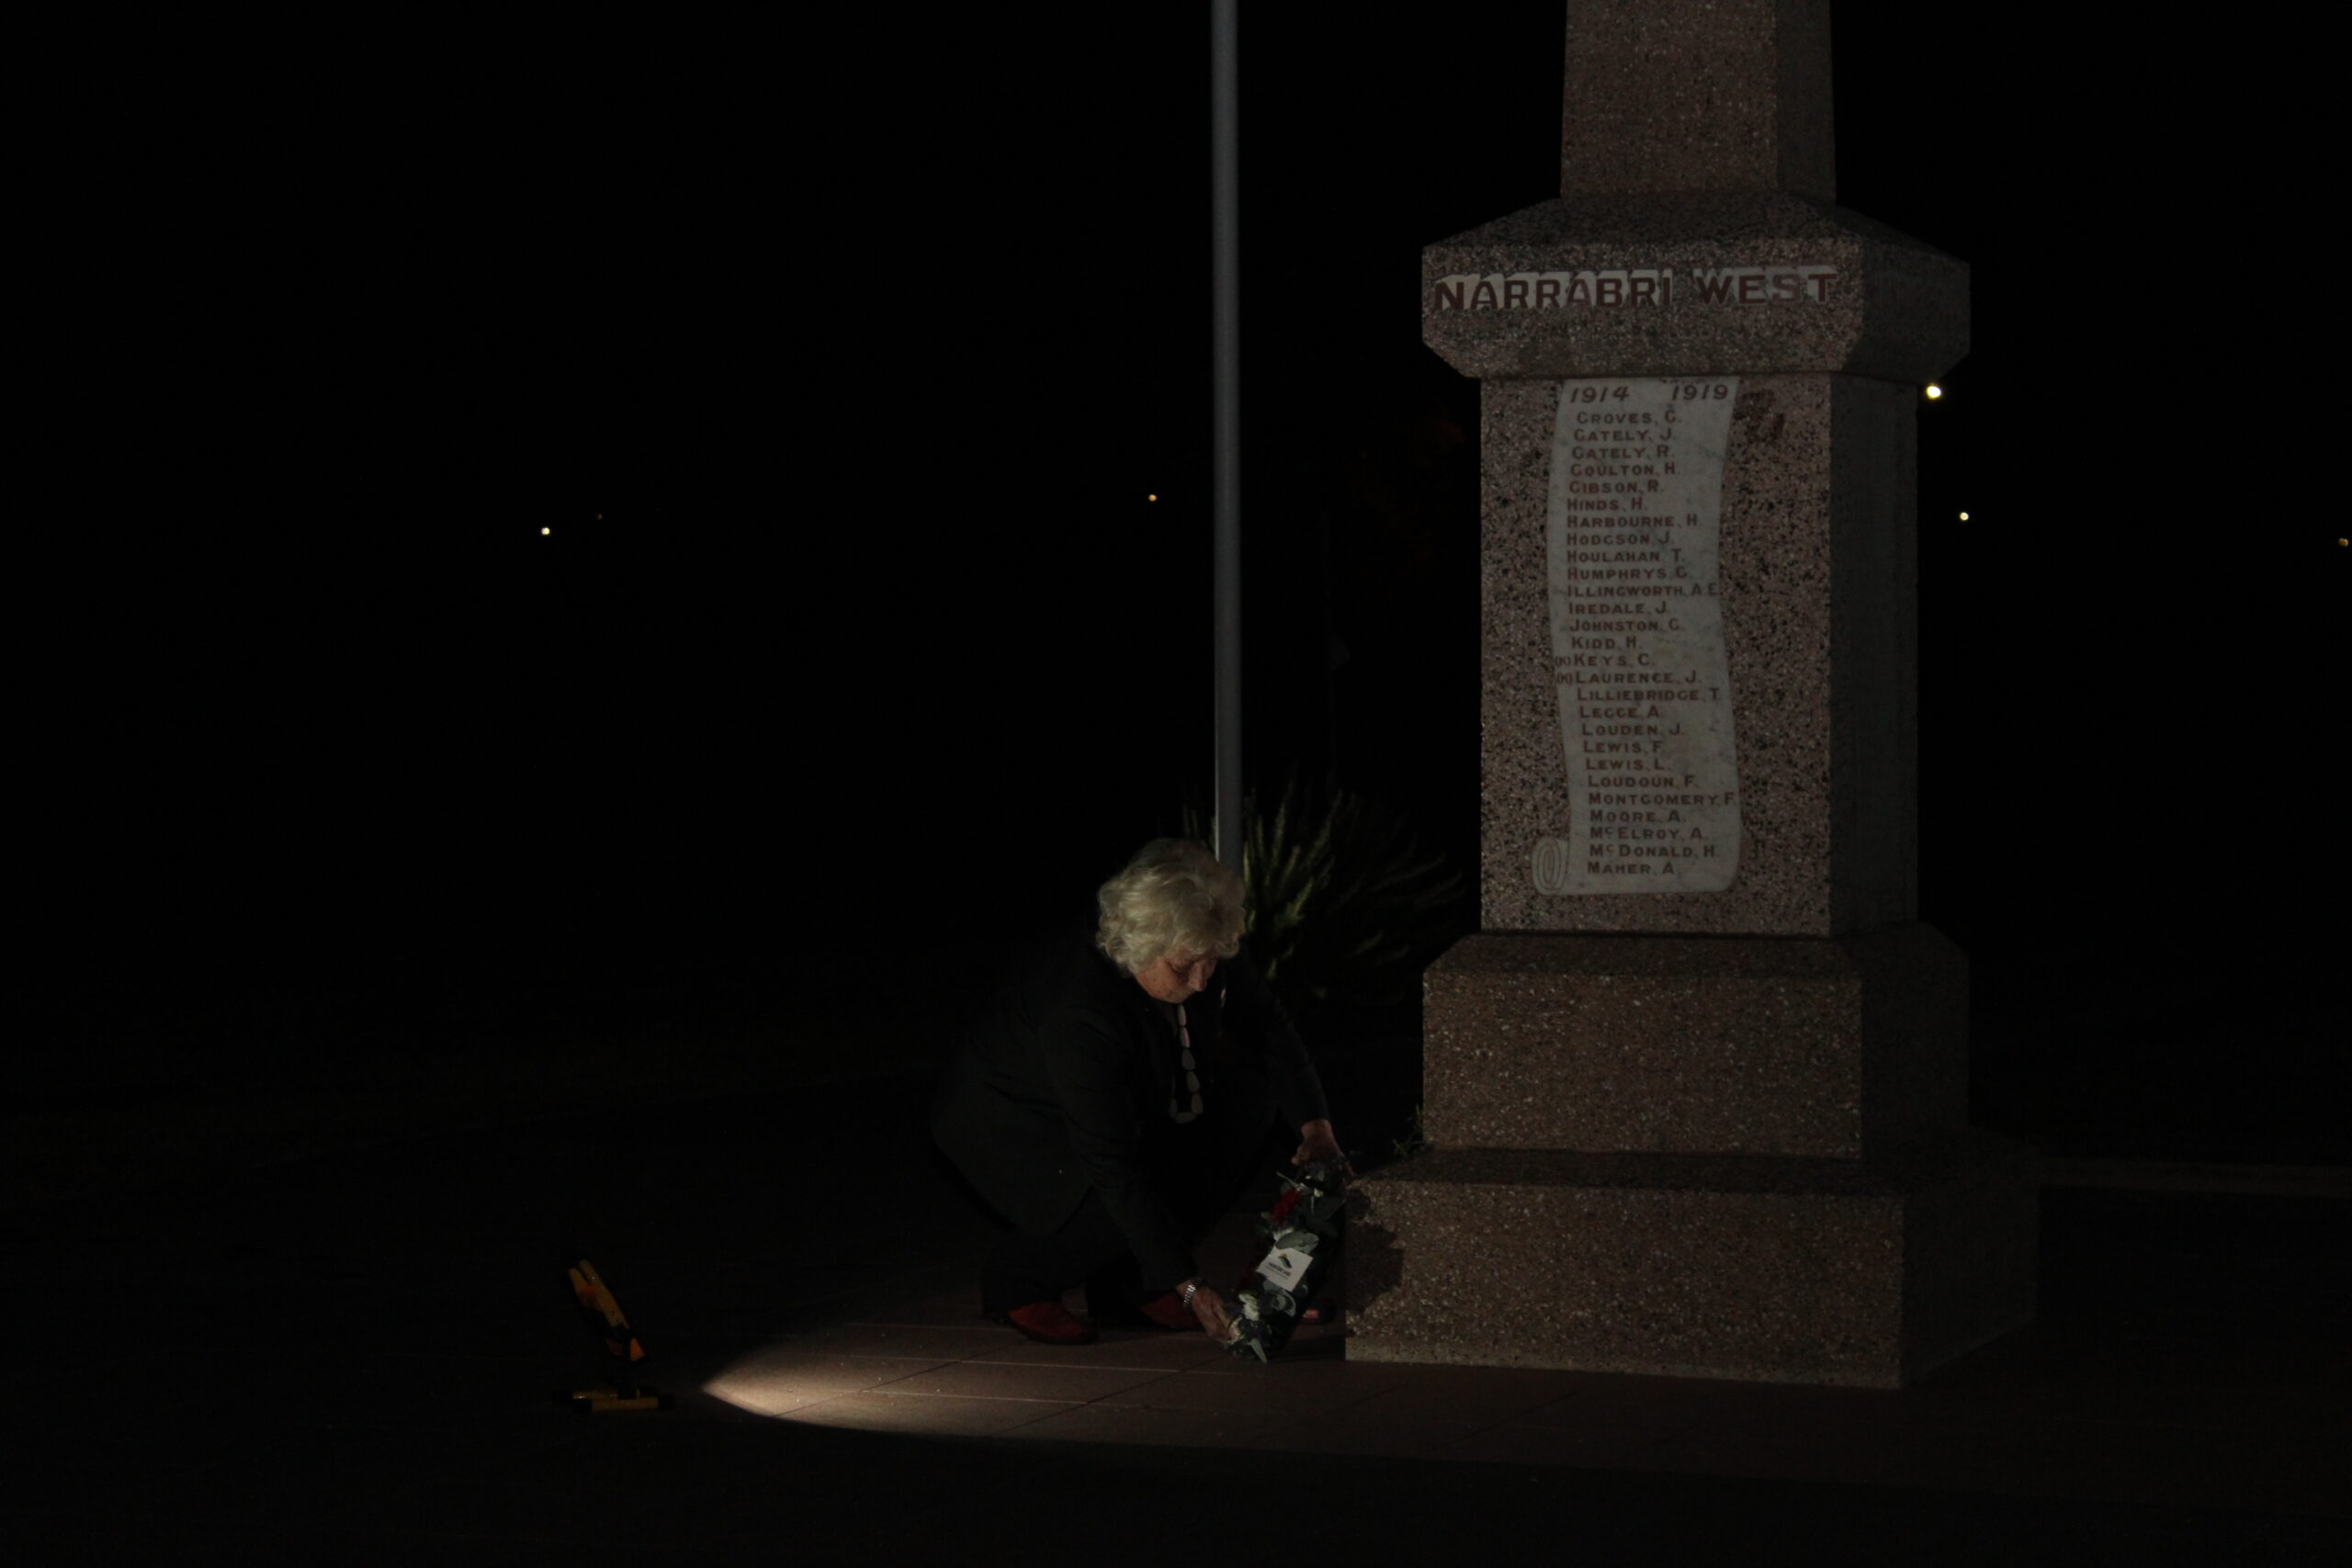 Cr Cathy Redding places a wreath at the base of the war memorial at the Narrabri West dawn service.